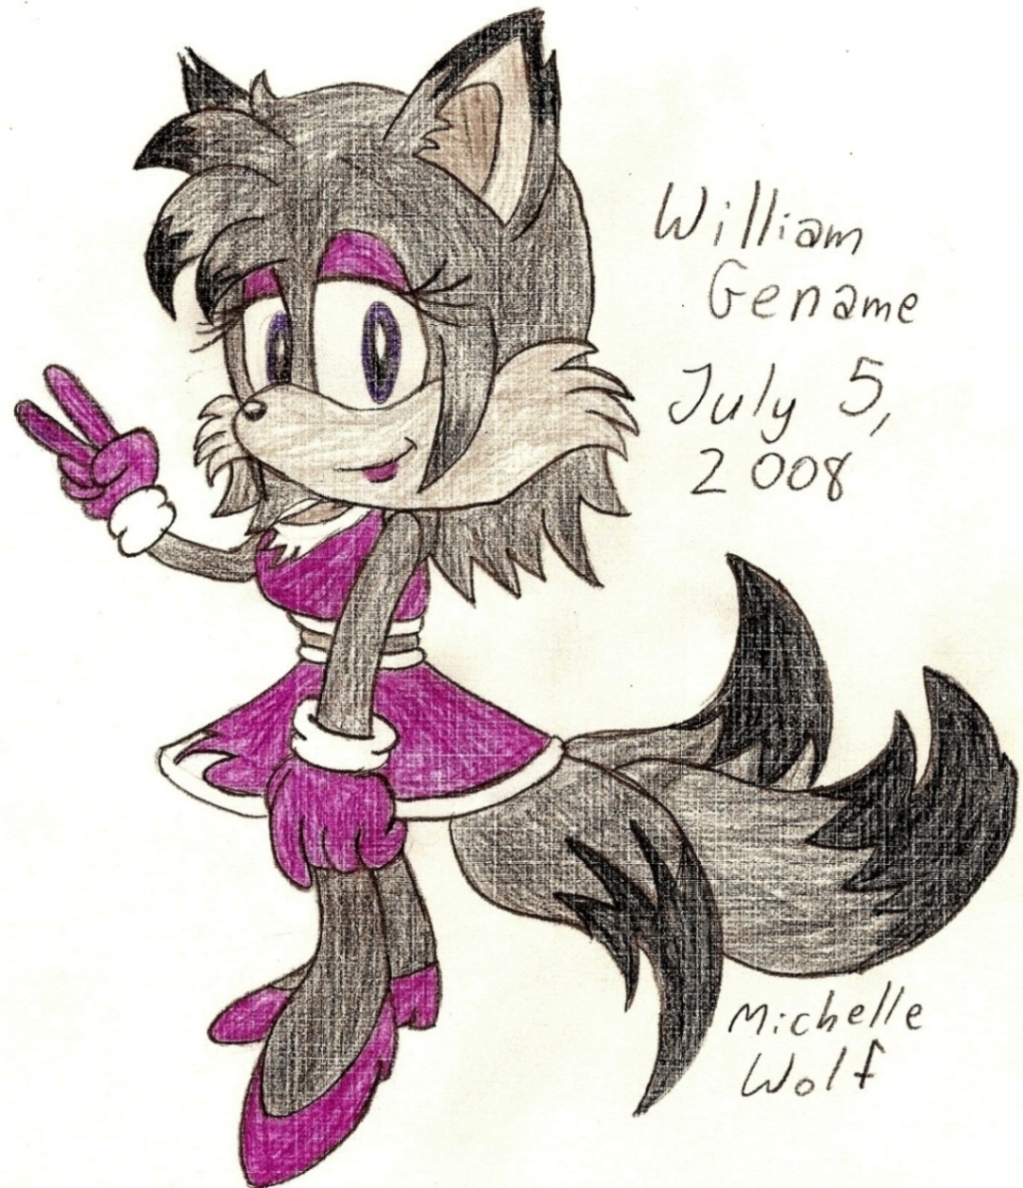 Michelle Wolf by germanname